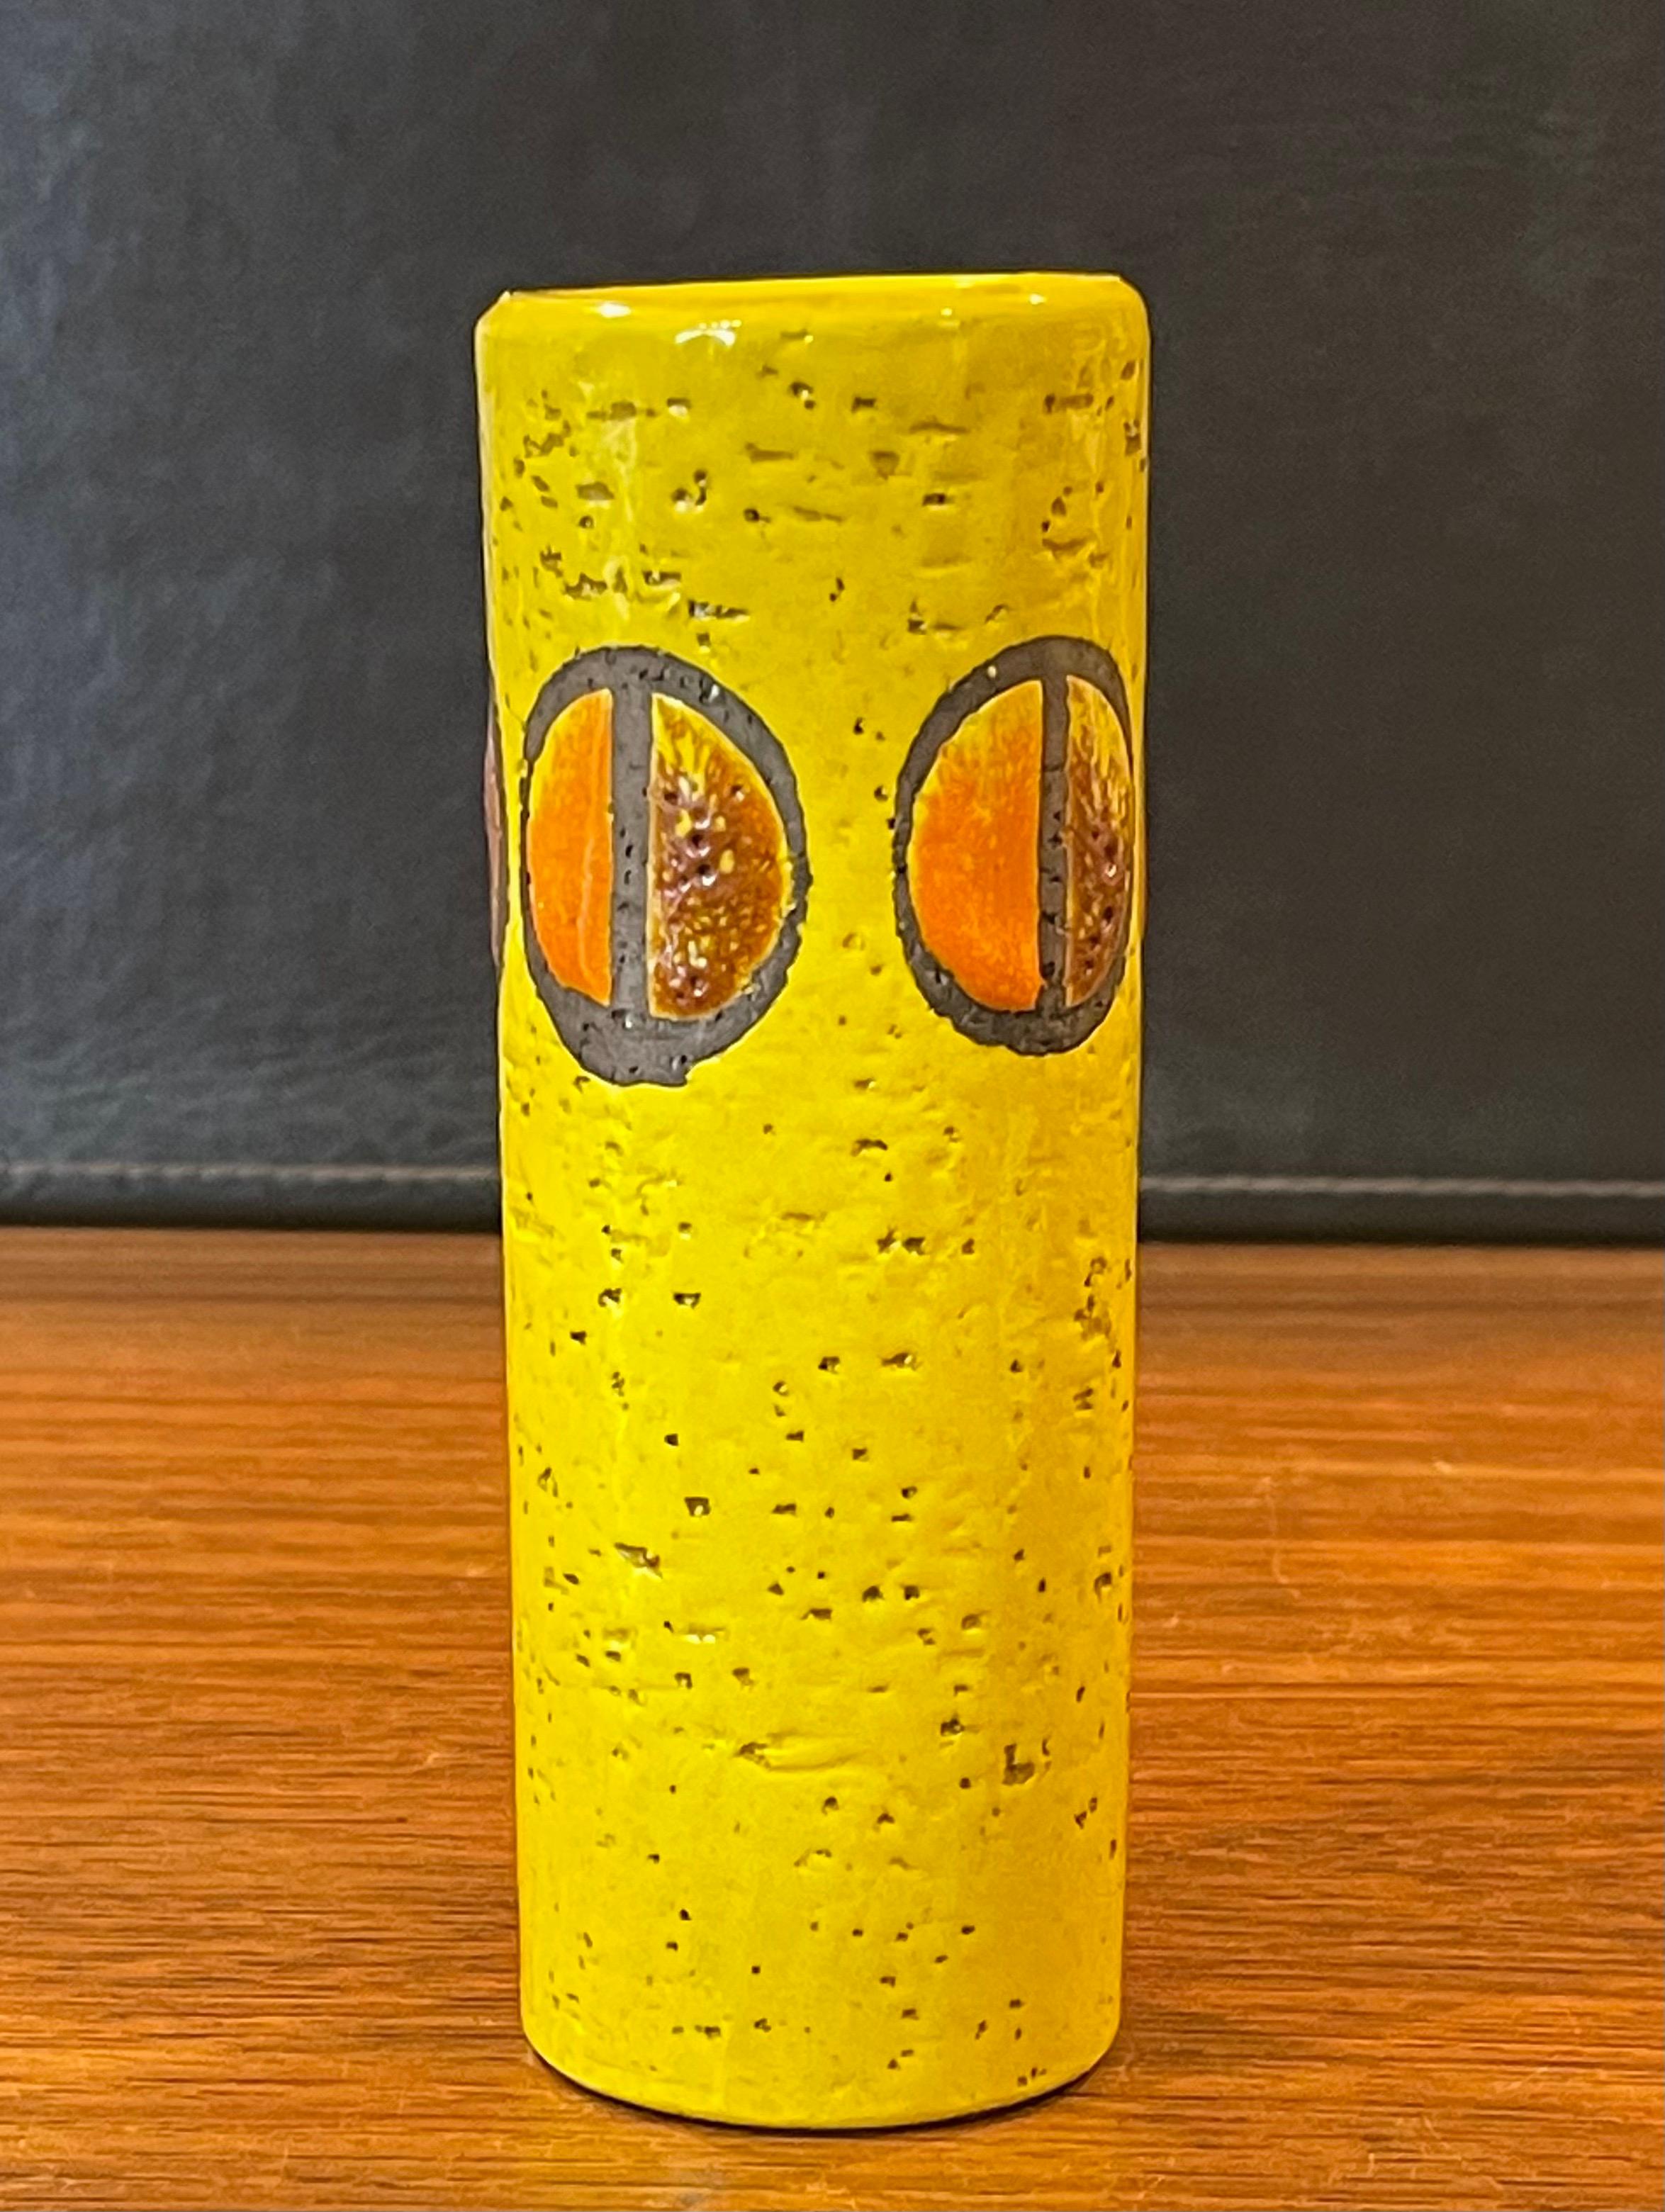 MCM Bitossi Petite Yellow Vase by Rosenthal Netter In Good Condition For Sale In San Diego, CA